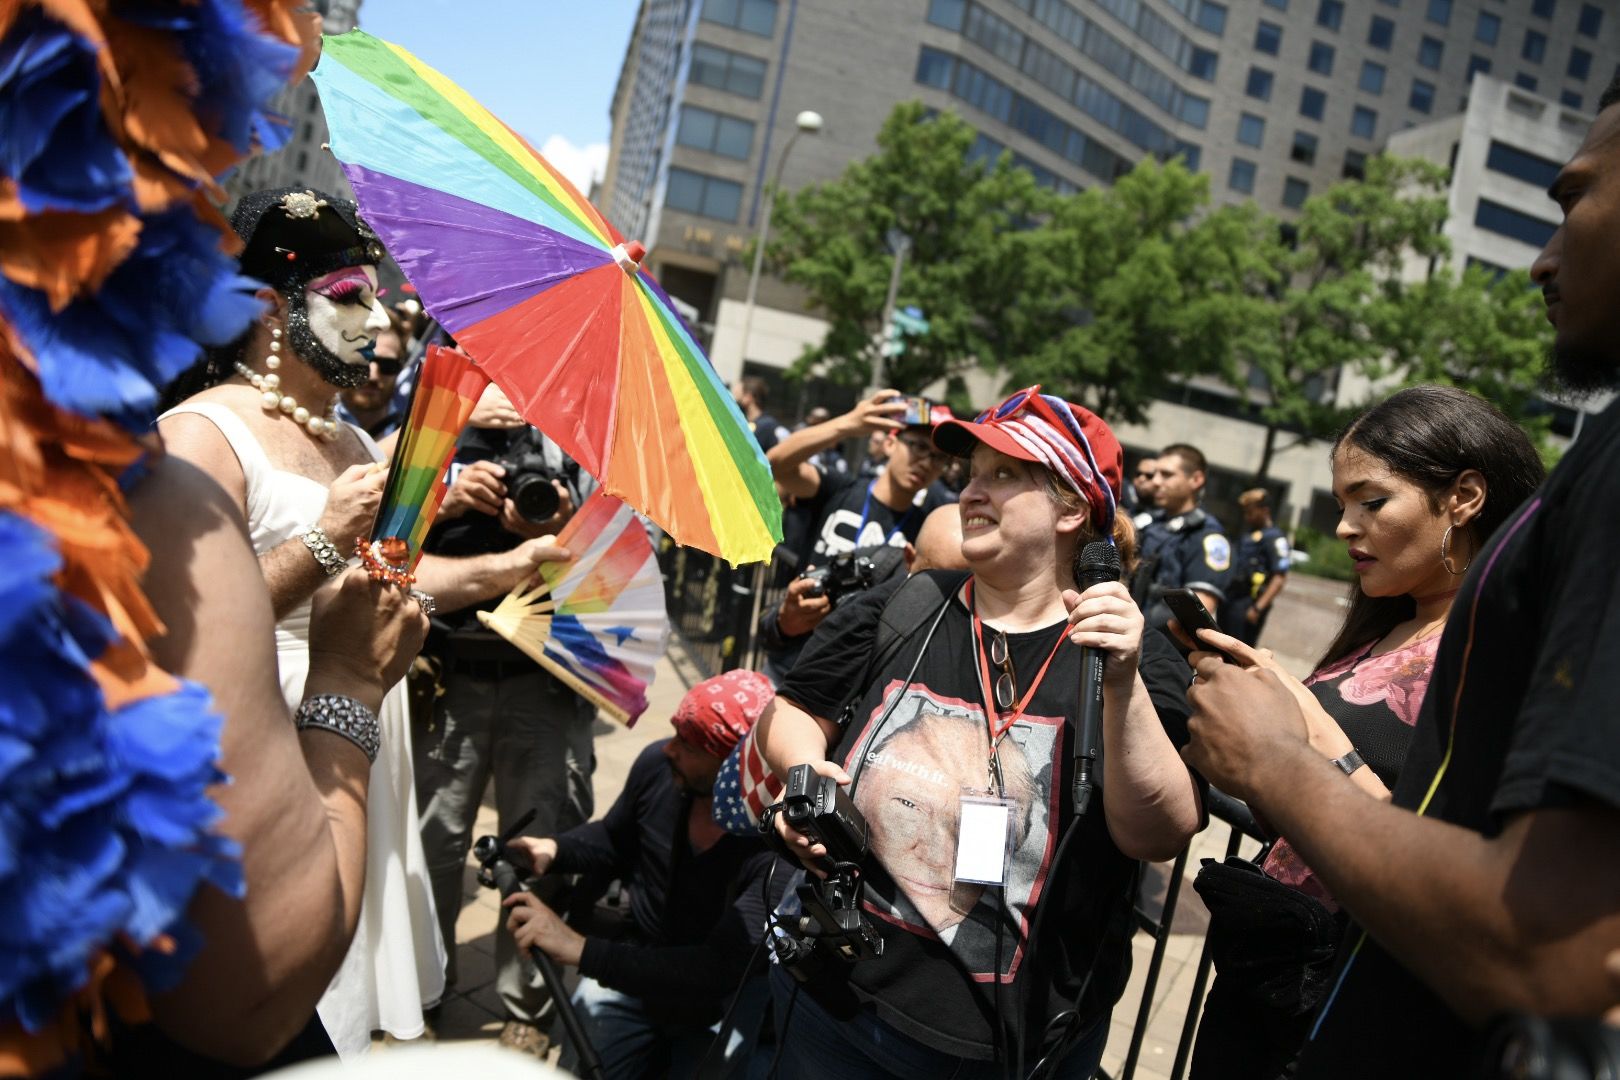 LGBTQ activists wave rainbow flags in an attempt to drown out a right-wing broadcast, seen lower right, during a far-right rally in Washington, D.C. on July 6, 2019. Trump supporters and anti-fascist organizers held dueling rallies across the street from each other, leading to high tensions as D.C. and U.S. Park Police largely held the peace. (WTOP/Alejandro Alvarez)